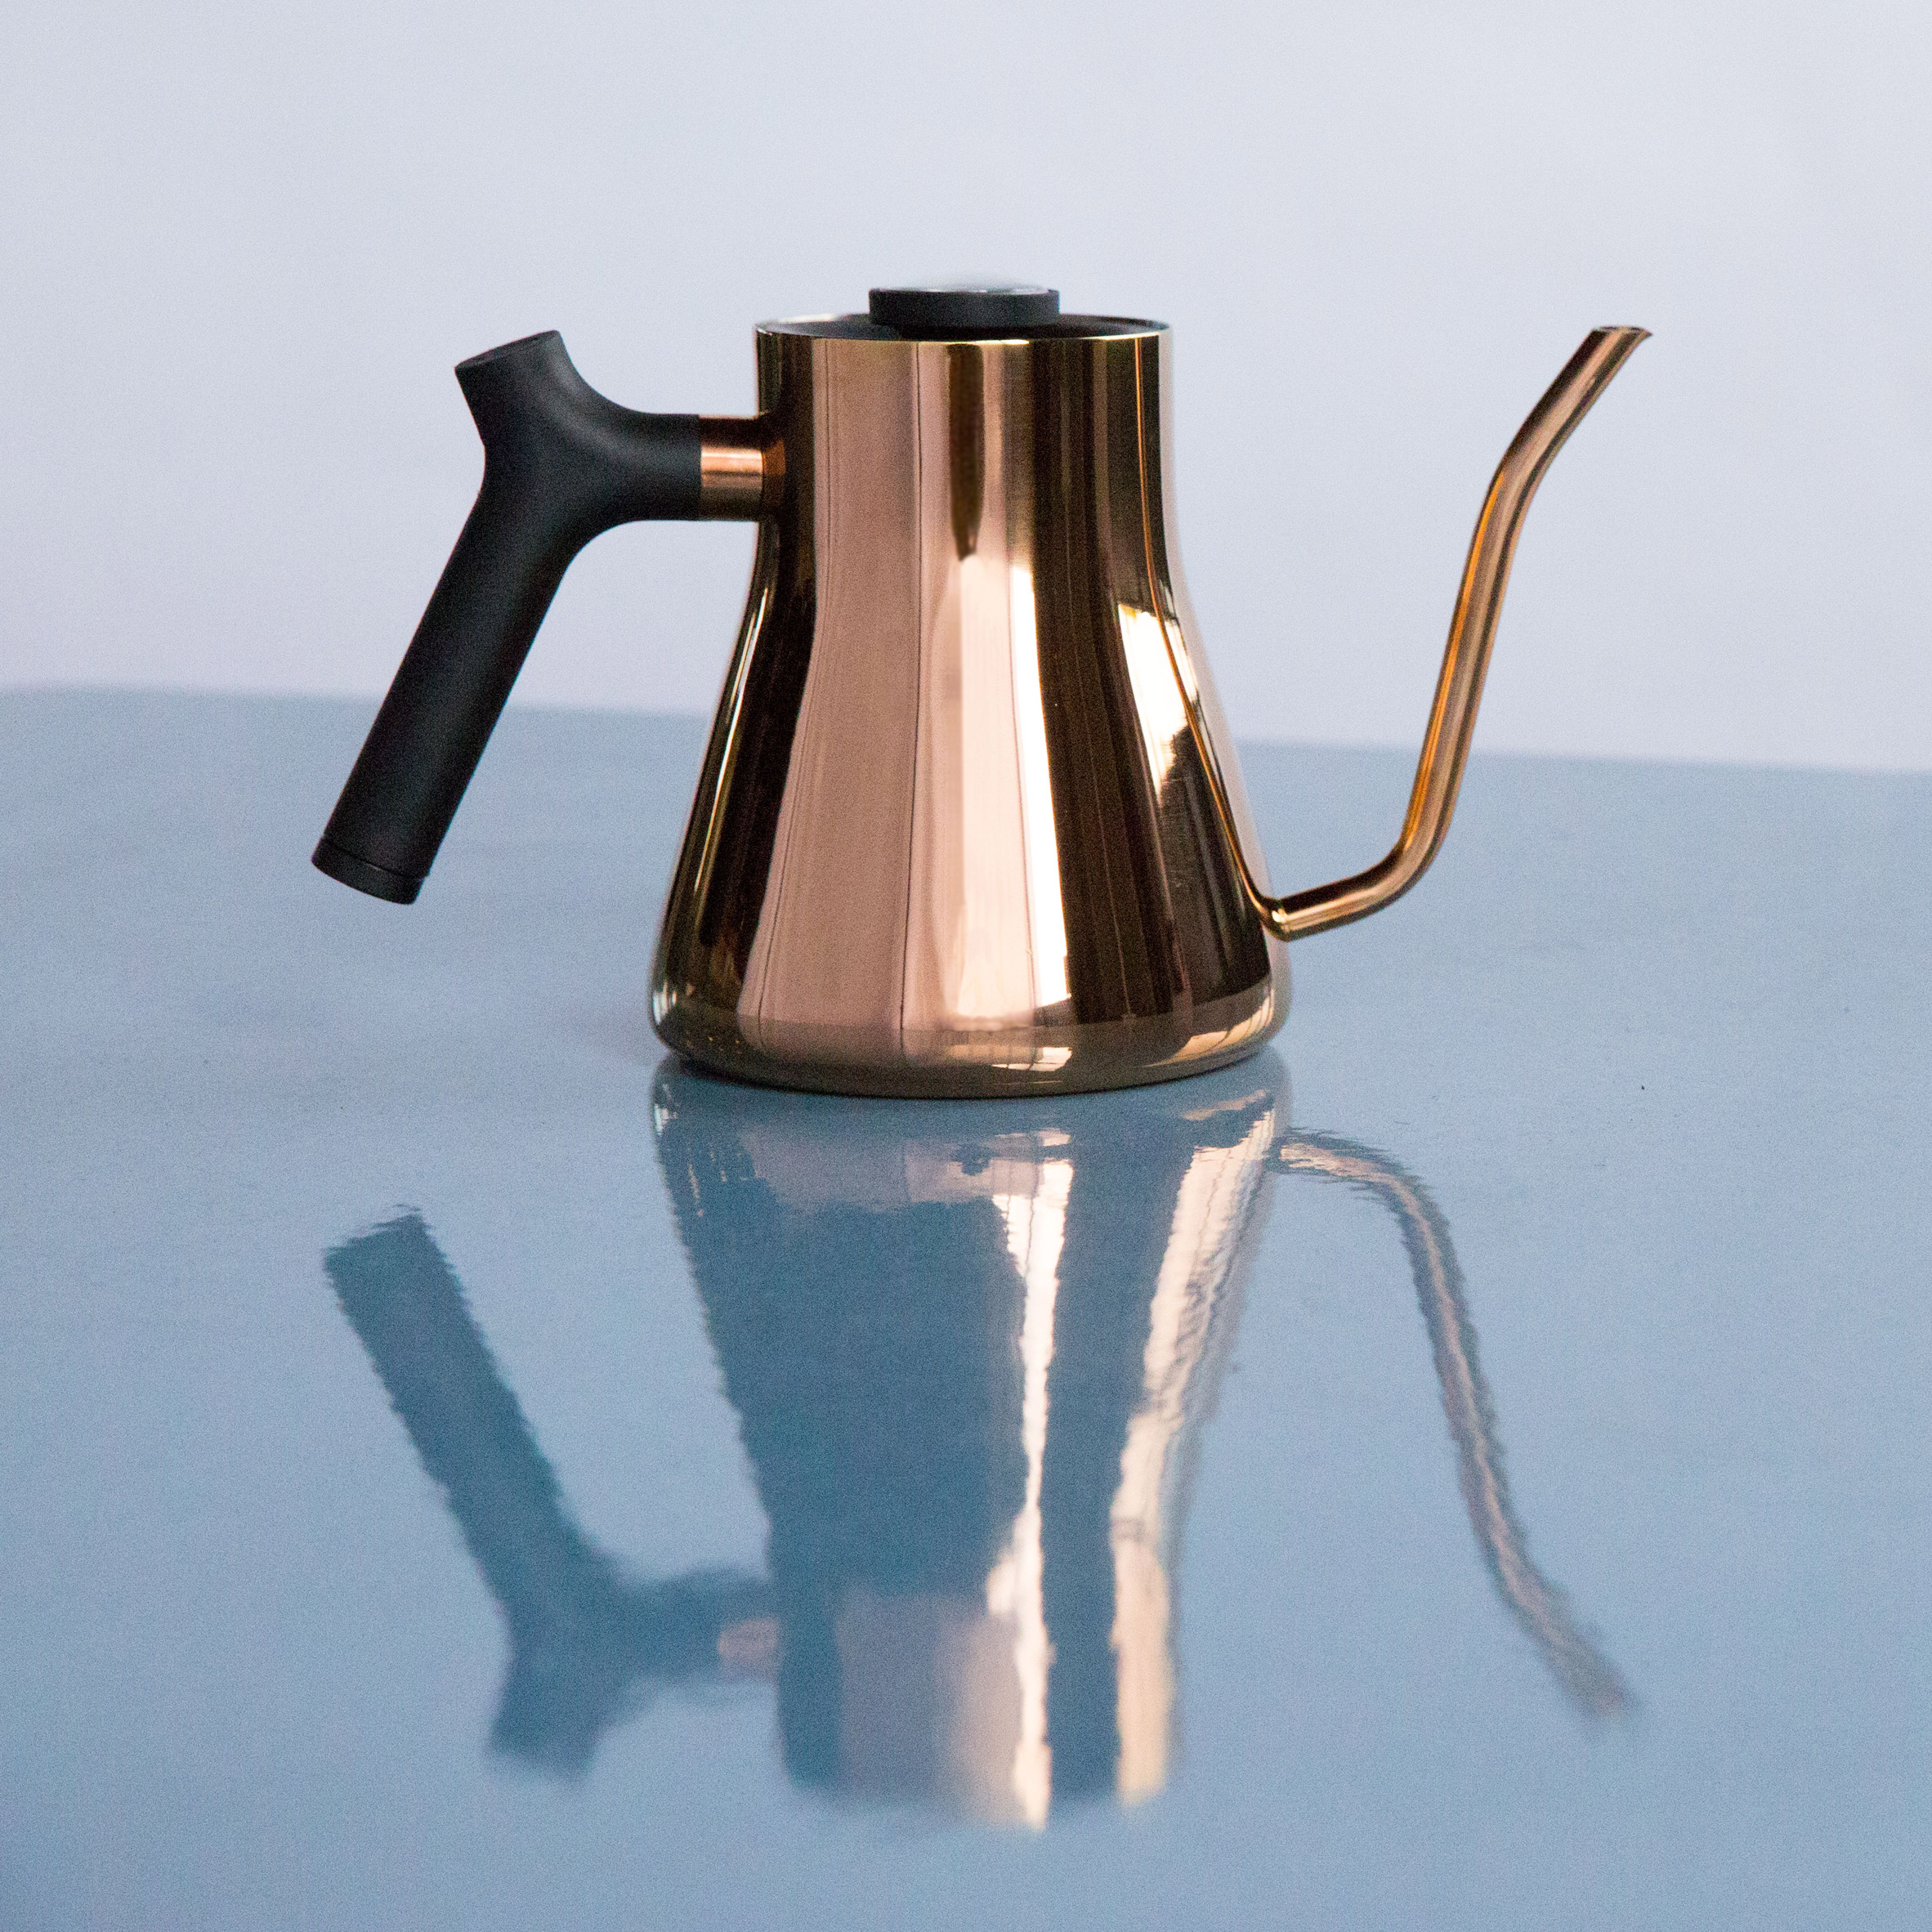 Best Electric Kettles Not Made In China – 2023's Top Picks!